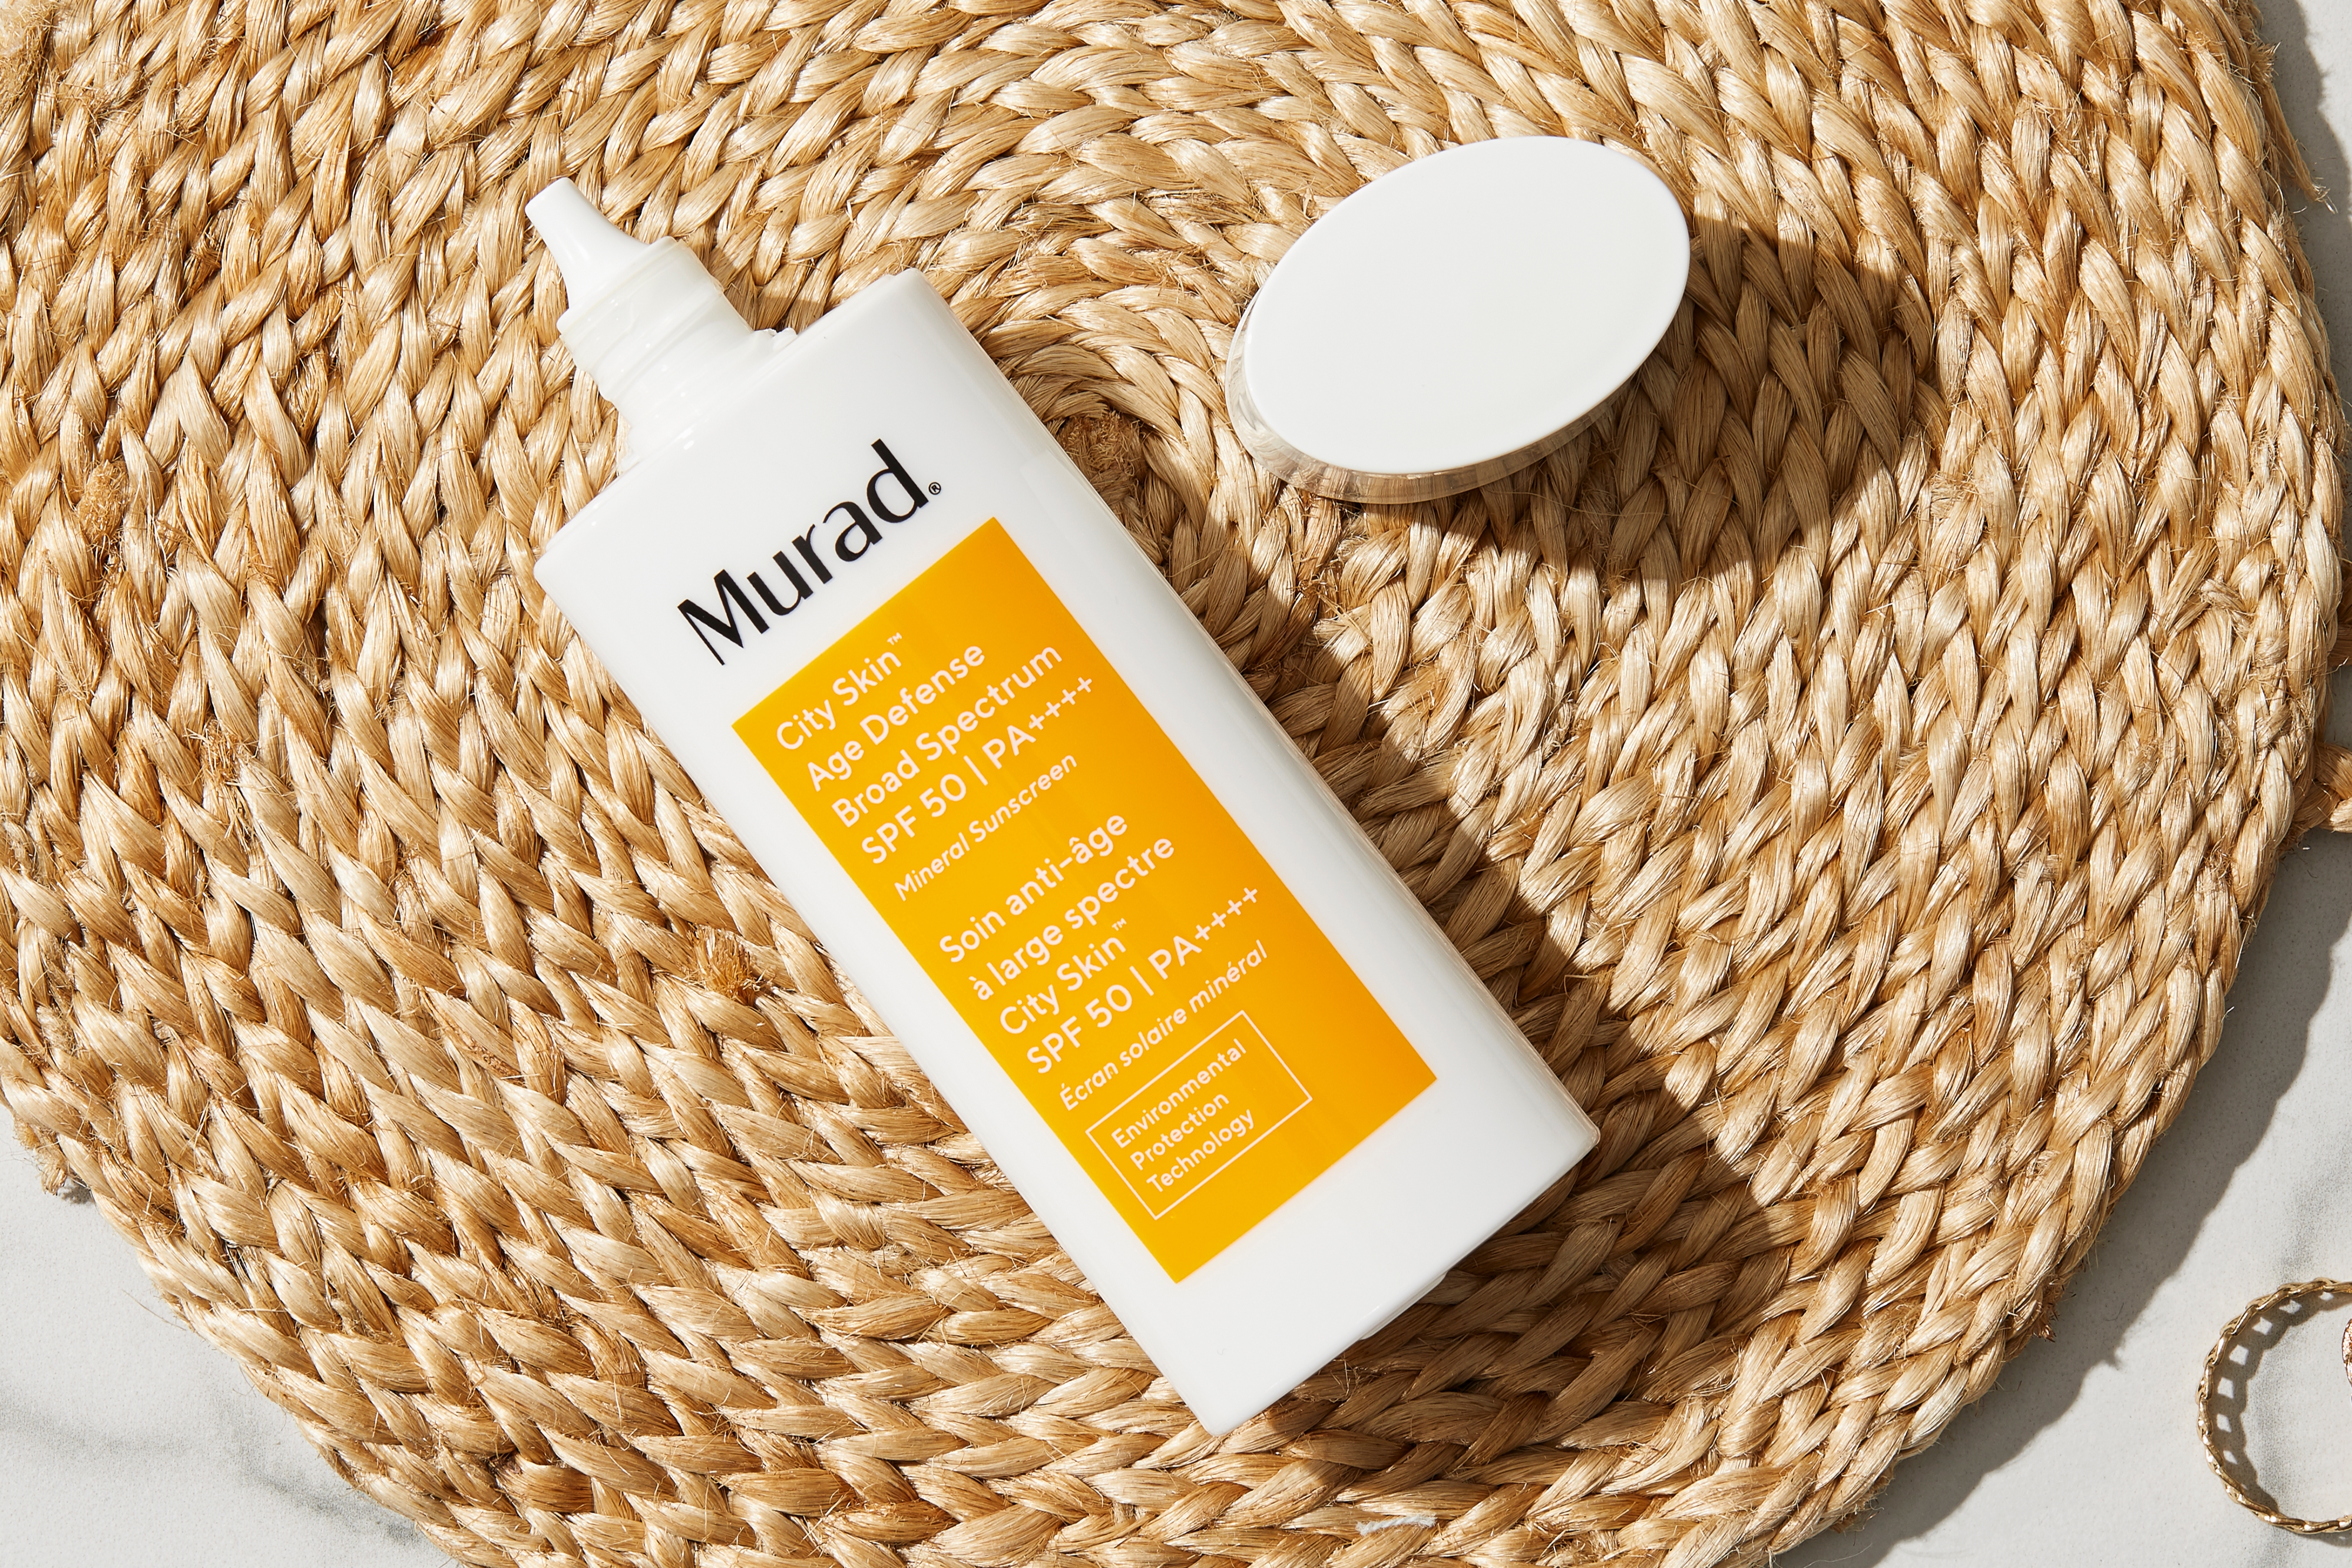 Everything you Need to Know about SPF | Murad Age Defence SPF 50 | SpaceNK